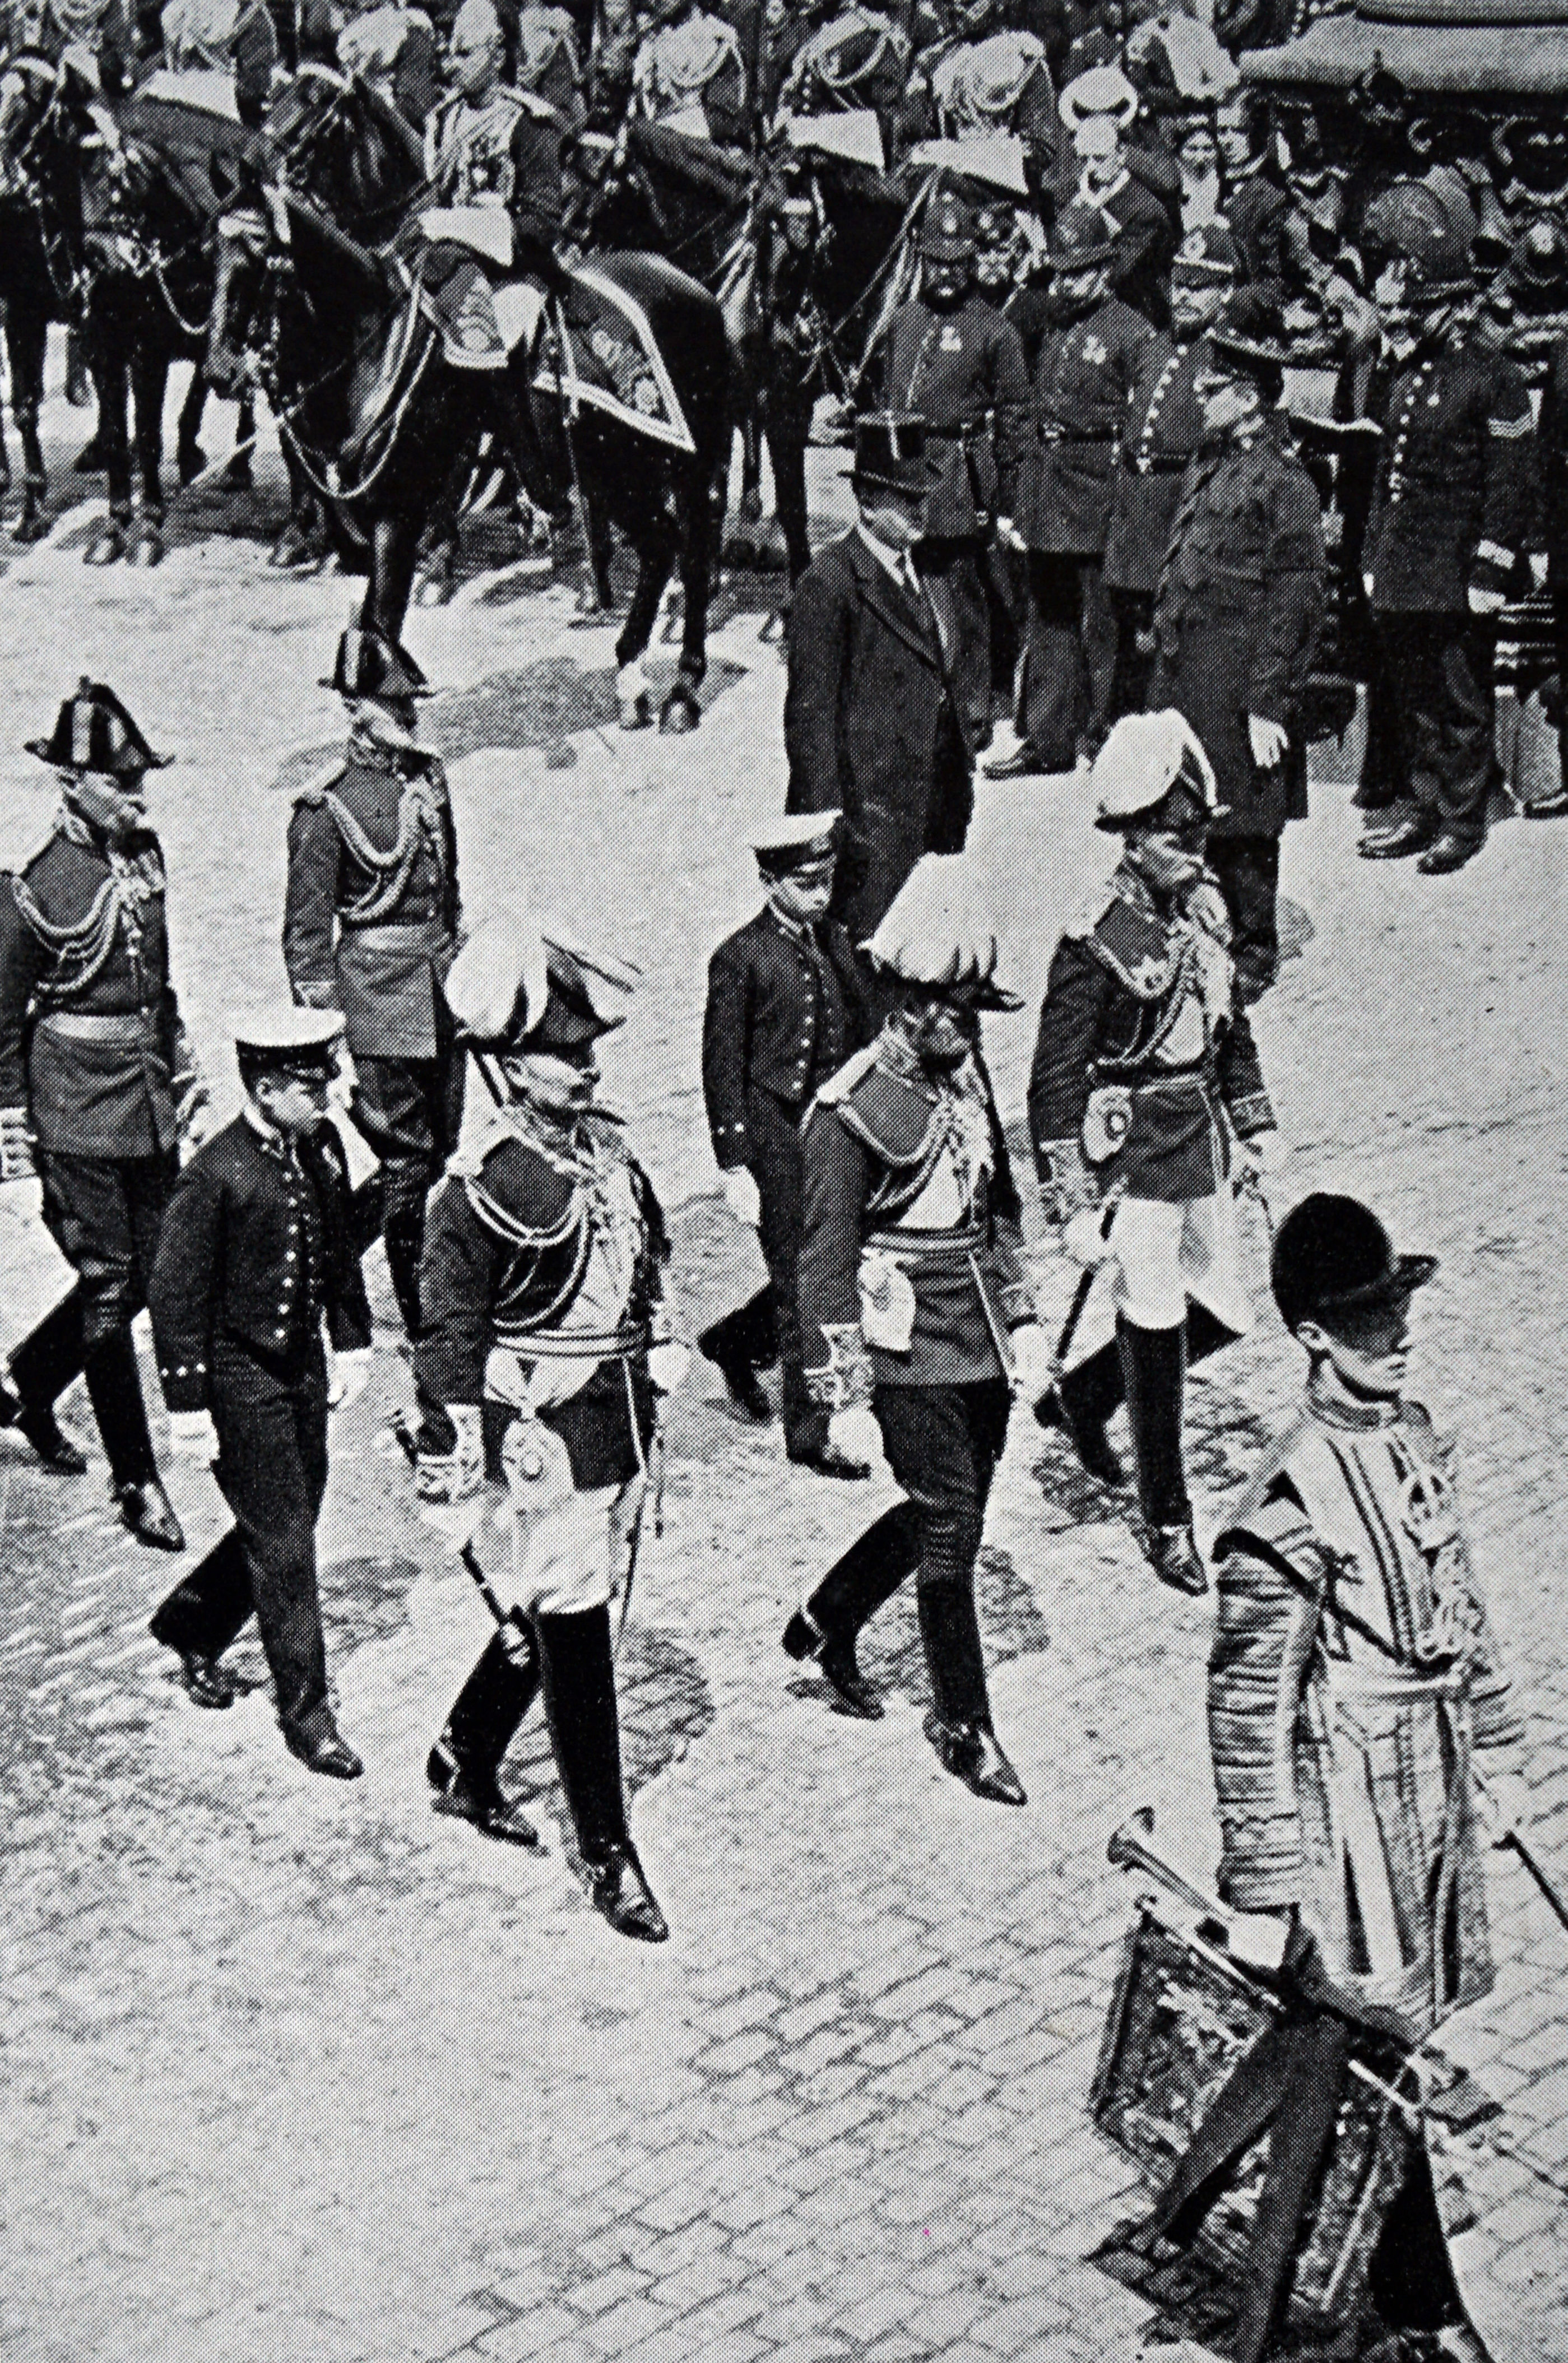 <p>Britain's newly minted King George V walked behind the coffin of his father, King Edward VII -- the eldest son of Queen Victoria and Prince Albert -- during the funeral procession on May 20, 1910, following the monarch's death at 68 at Buckingham Palace in London two weeks earlier. Edward VII was buried in St. George's Chapel at Windsor Castle.</p>